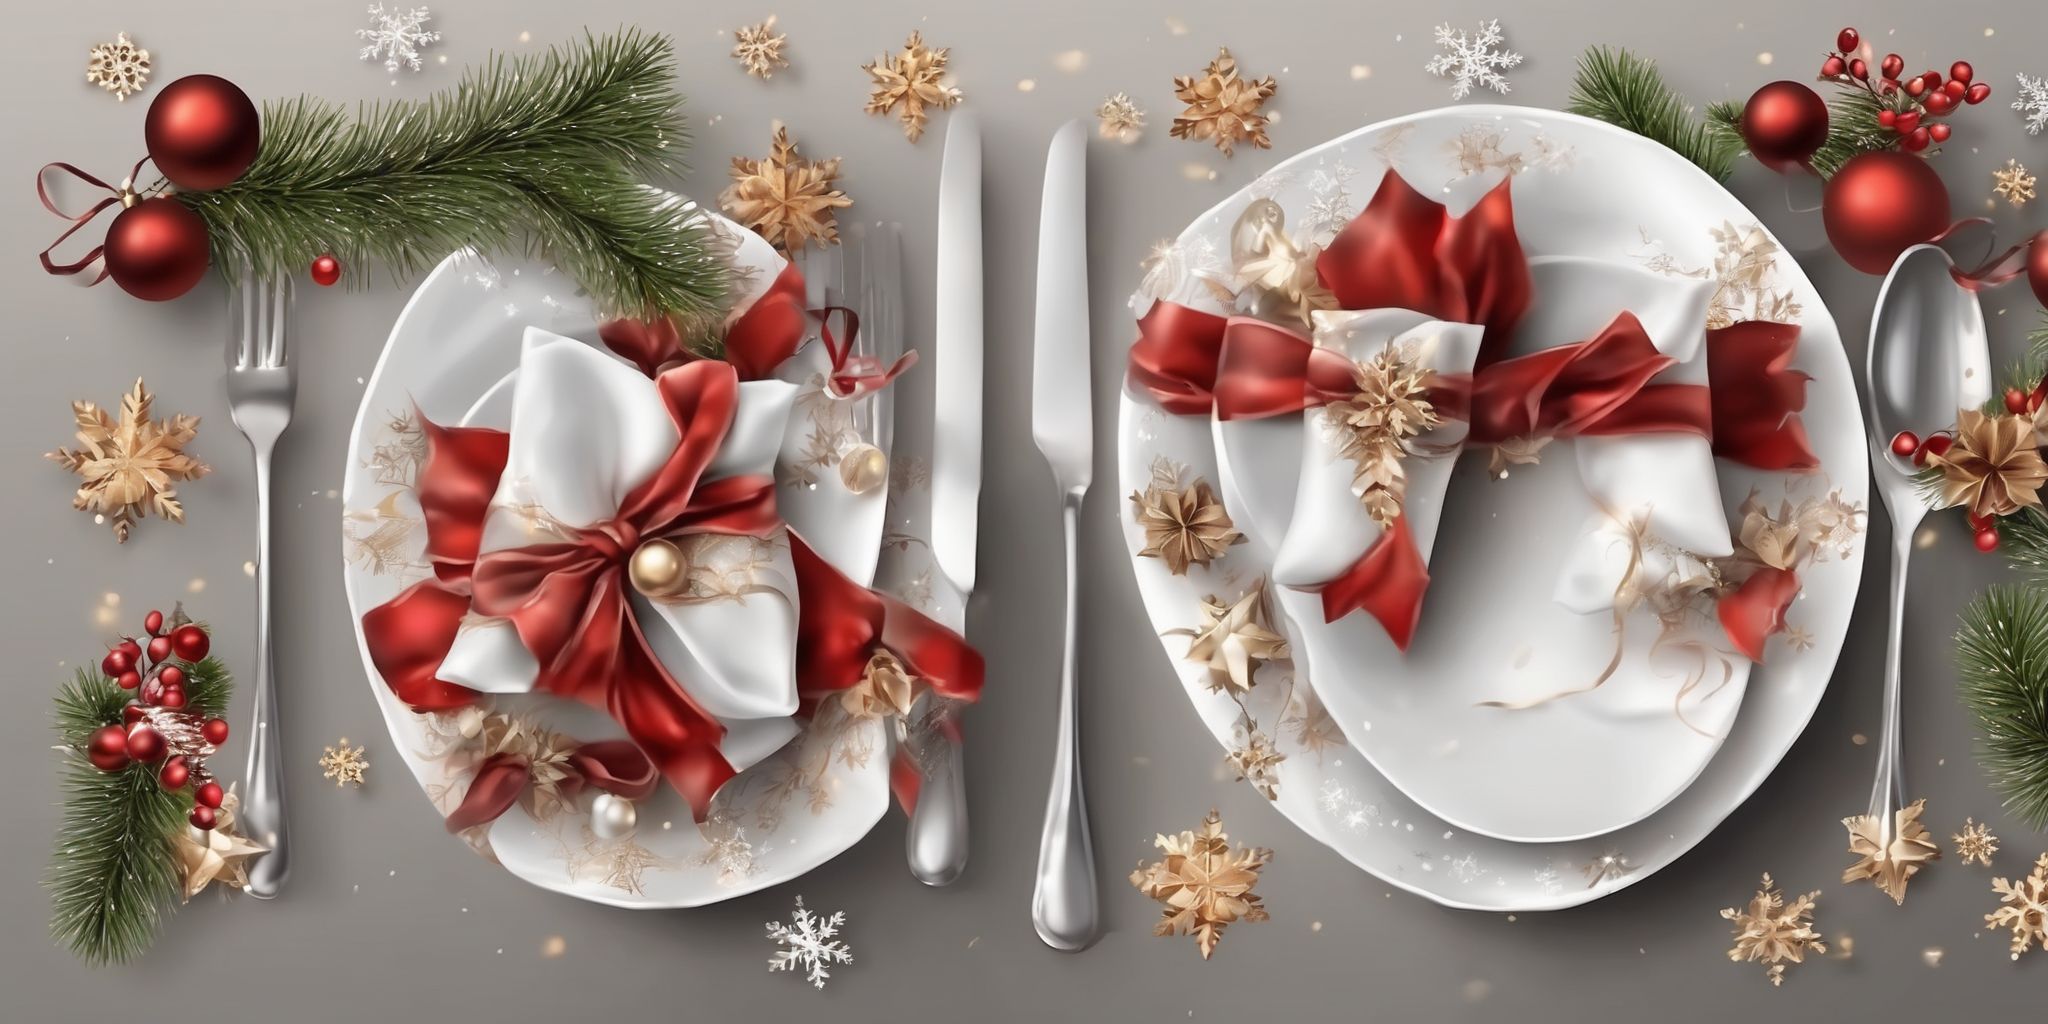 Table set in realistic Christmas style